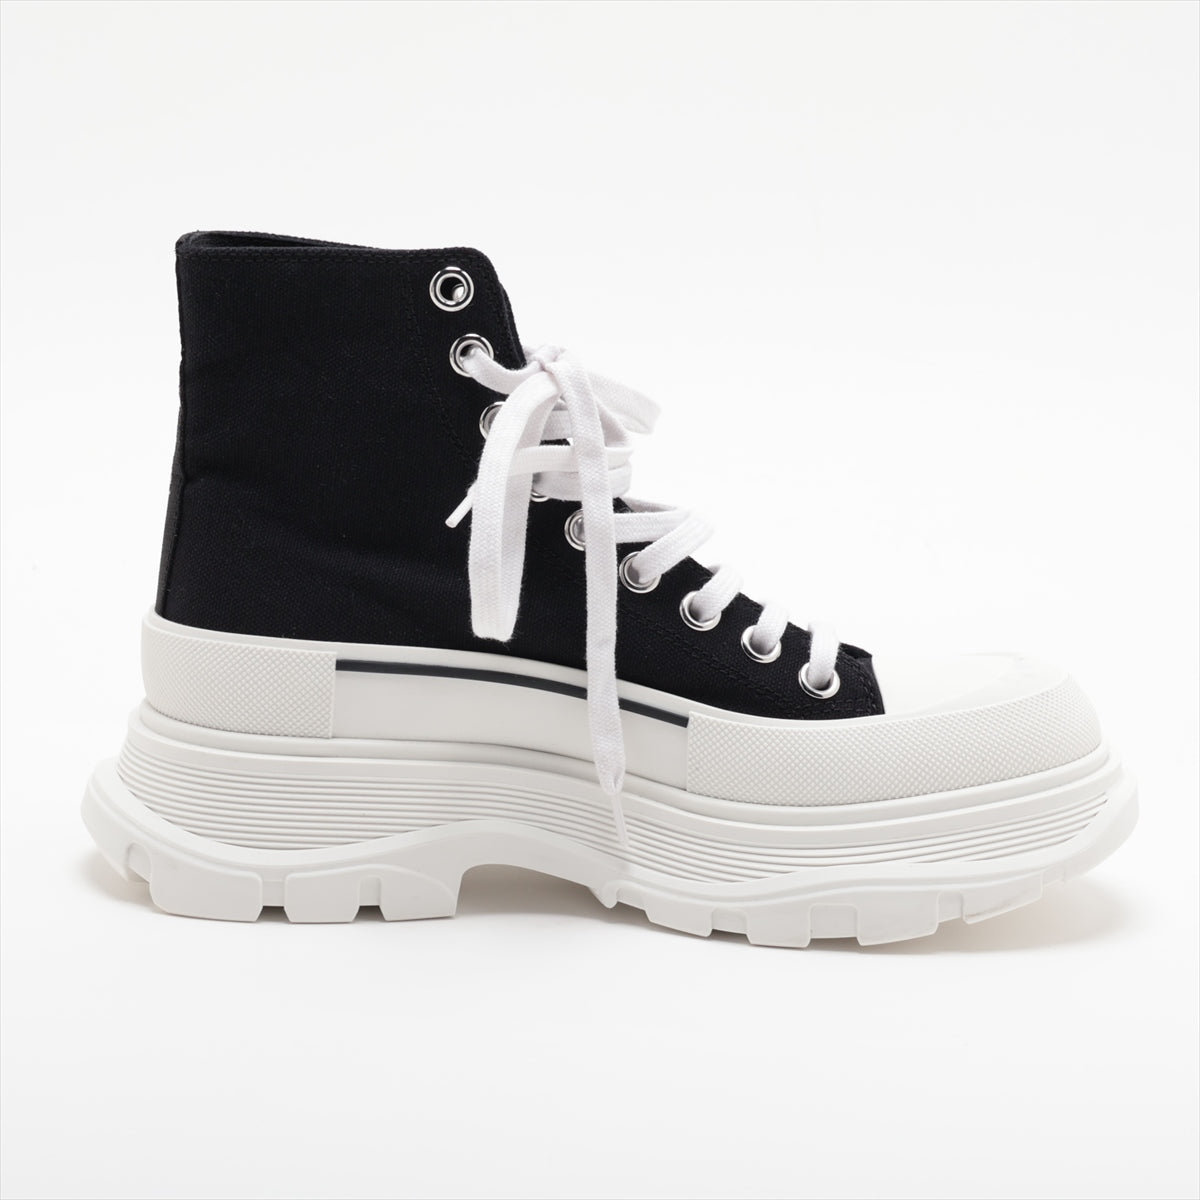 Alexander McQueen canvas High-top Sneakers 38 Ladies' Black 697080 Is there a replacement string